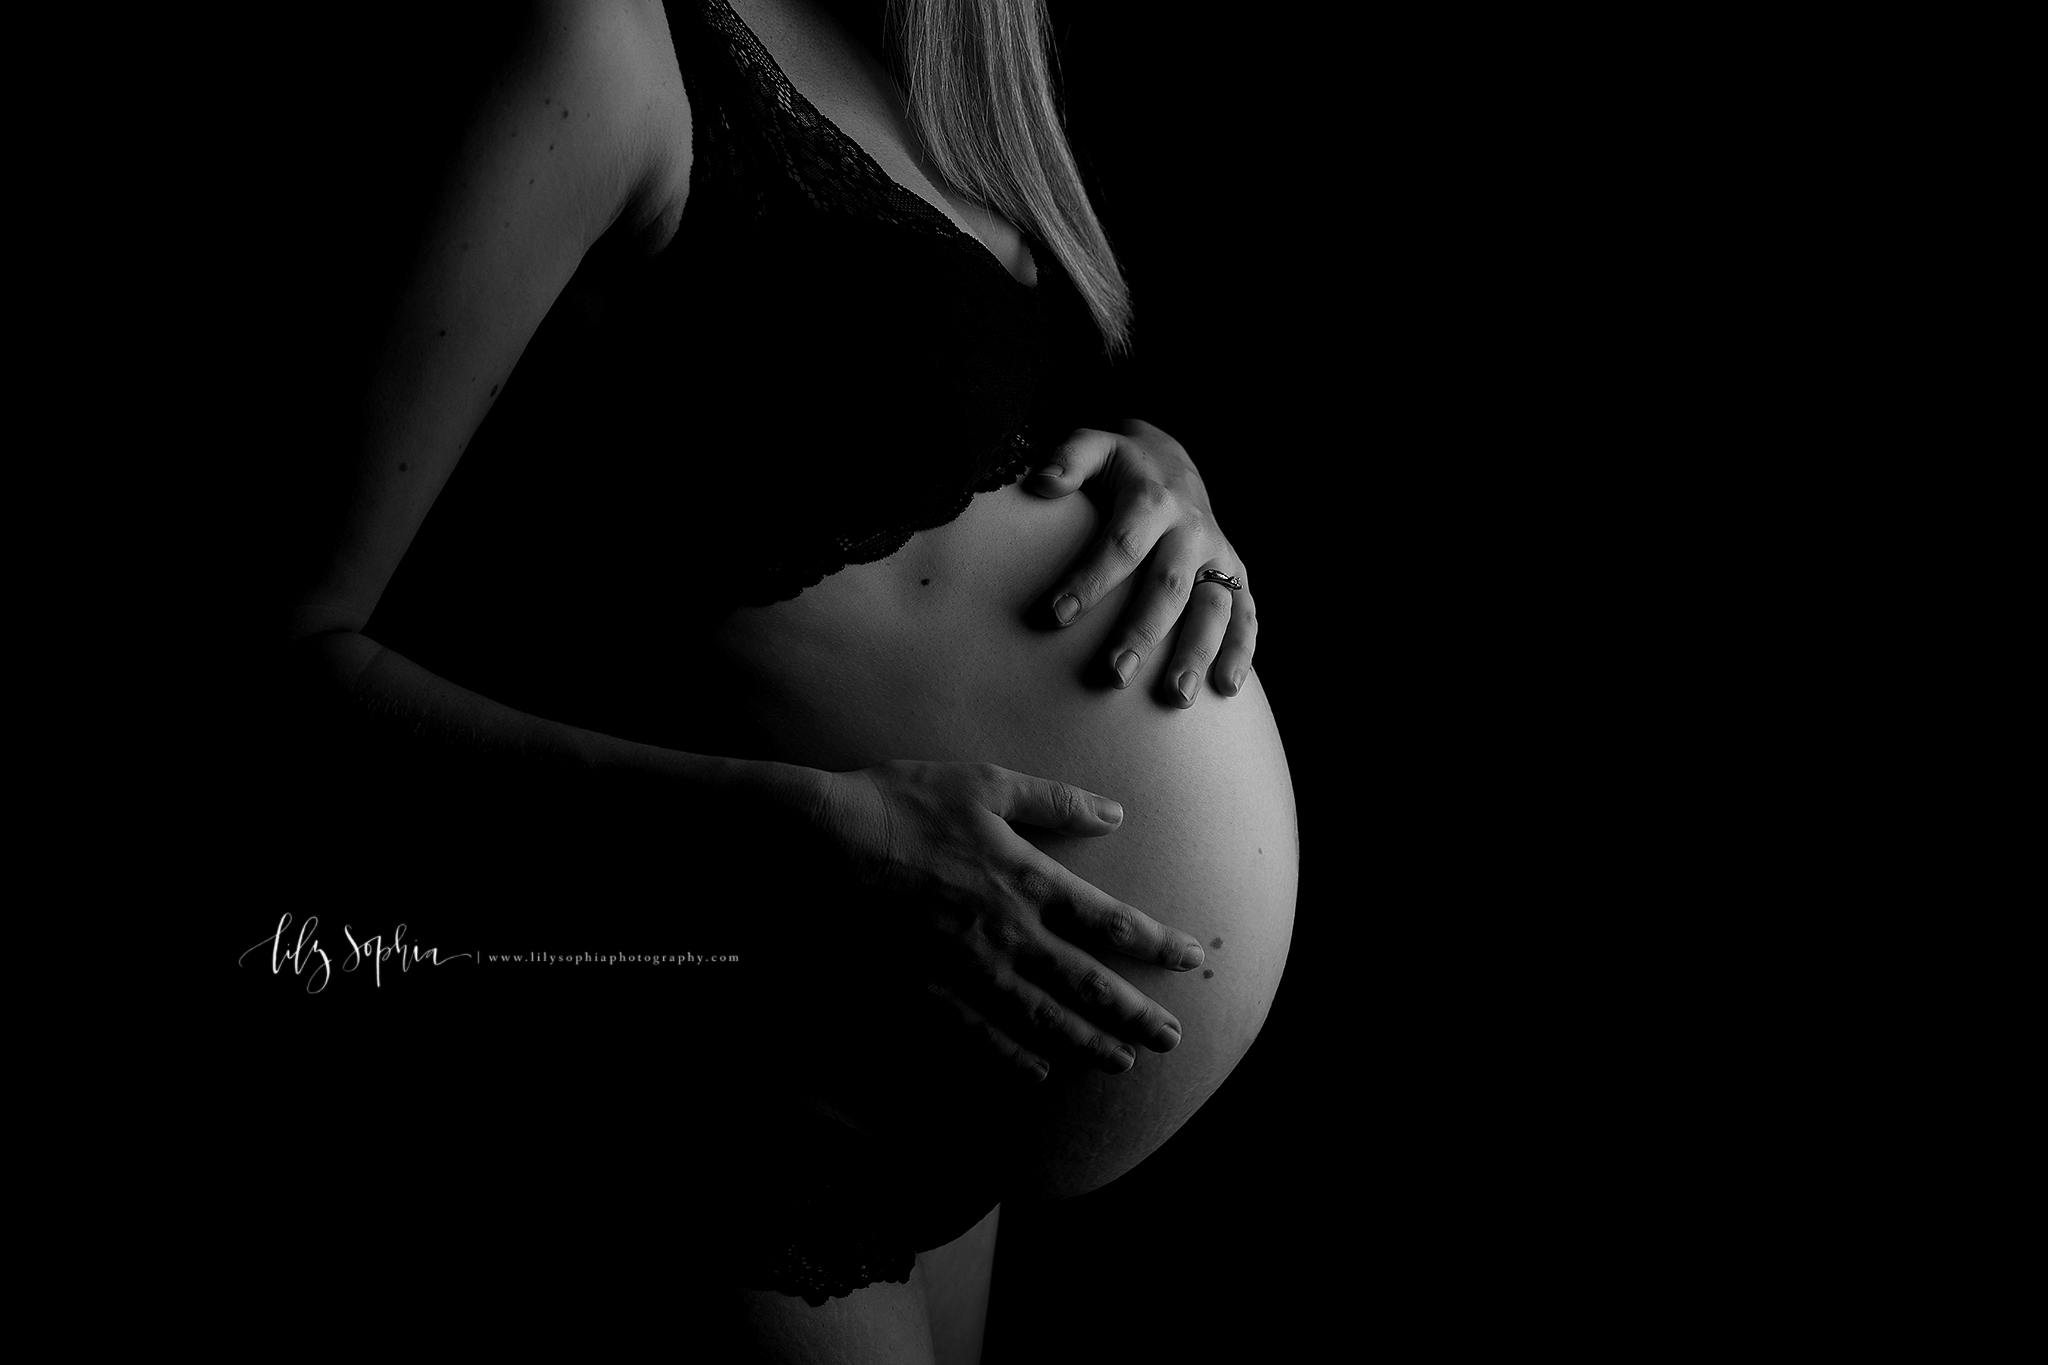  Black and white editorial maternity image with rim lighting of 38 weeks pregnant woman’s hands on bare belly in the intown Atlanta studio of Lily Sophia Photography. 